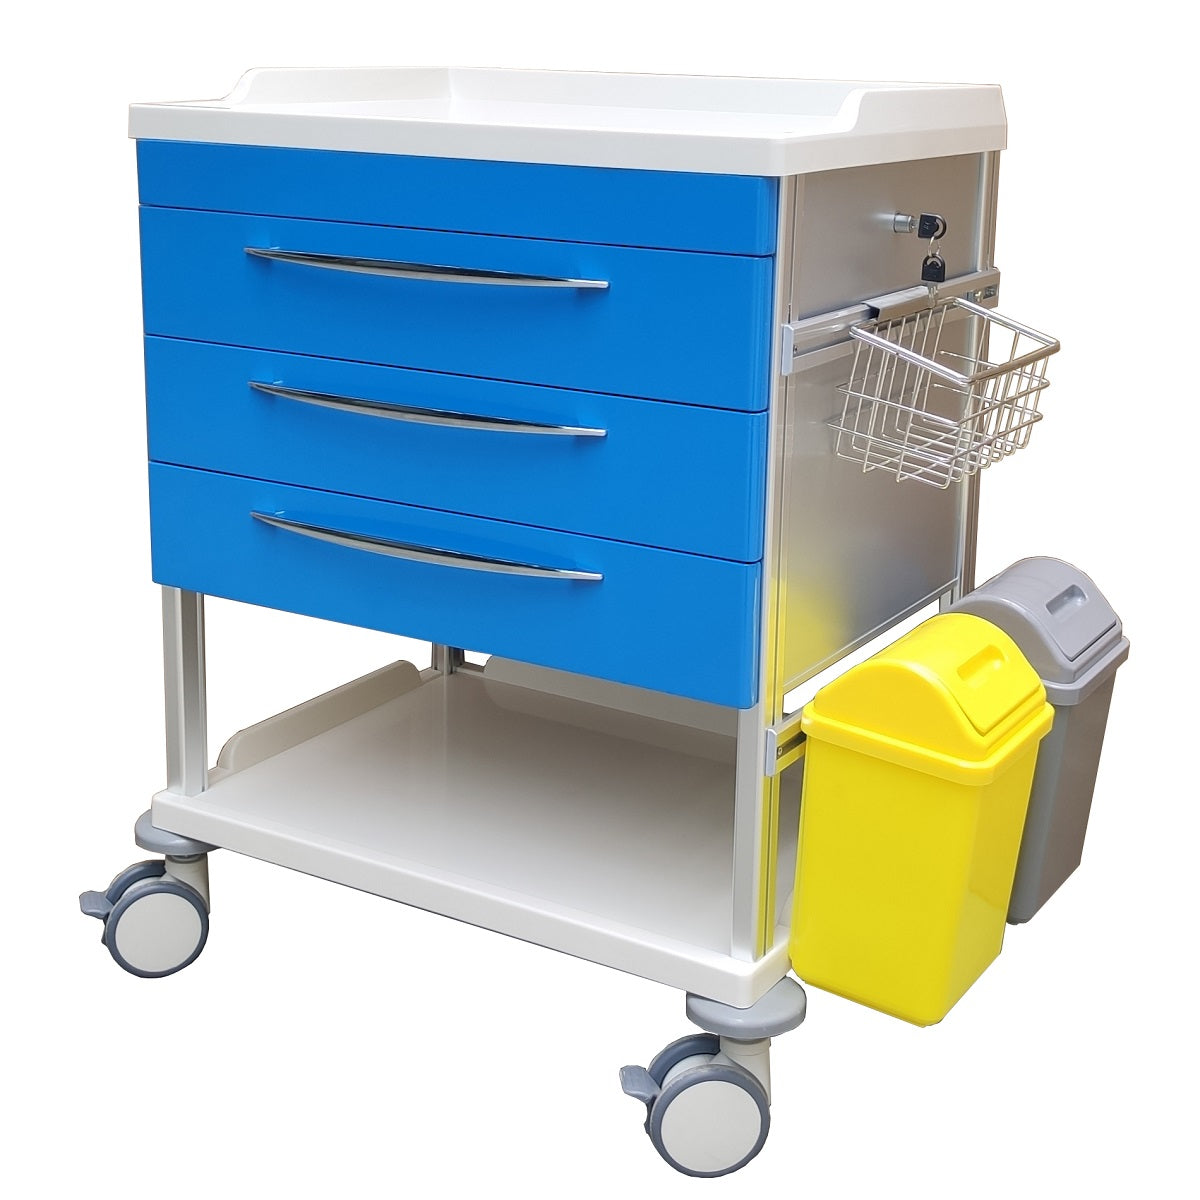 This three drawer treatment trolley comes with all accessories as standard to ensure you have everything you need out of the box.